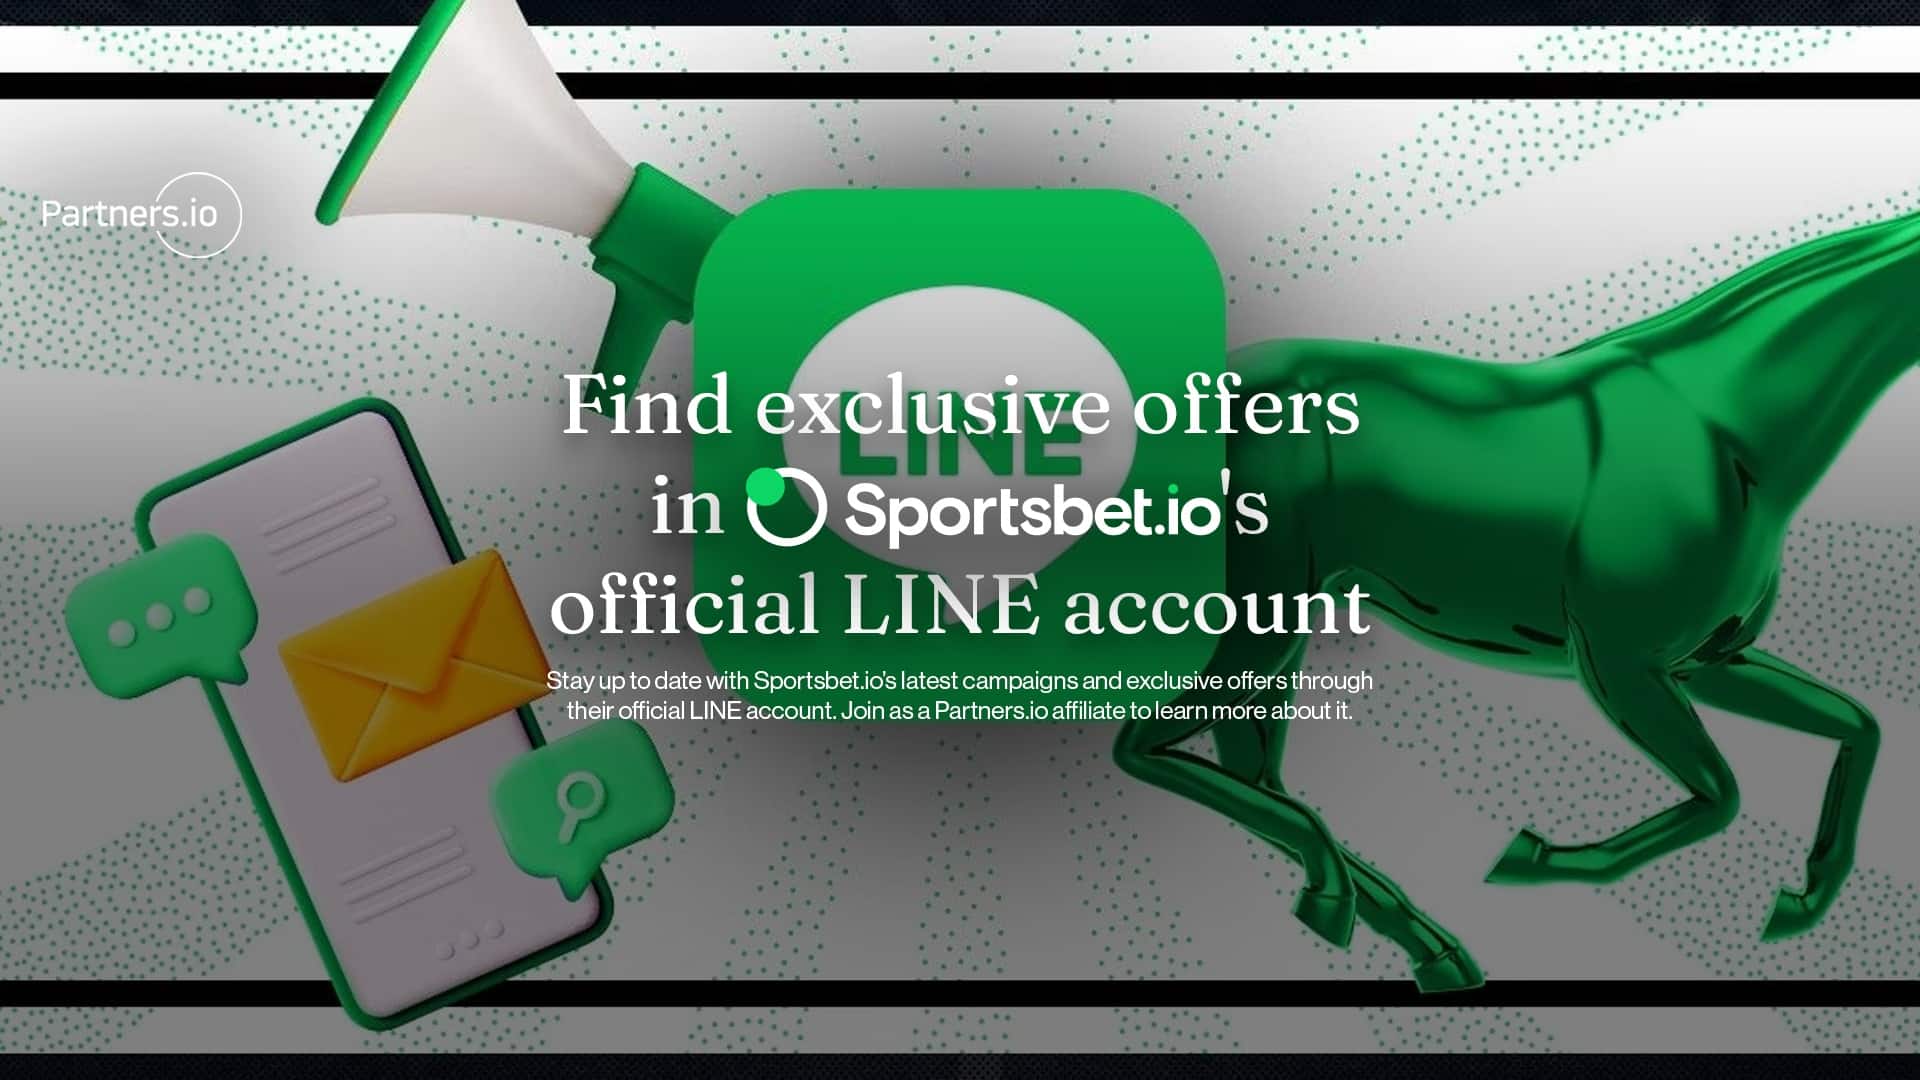 Find exclusive offers in Sportsbet.io's official LINE account